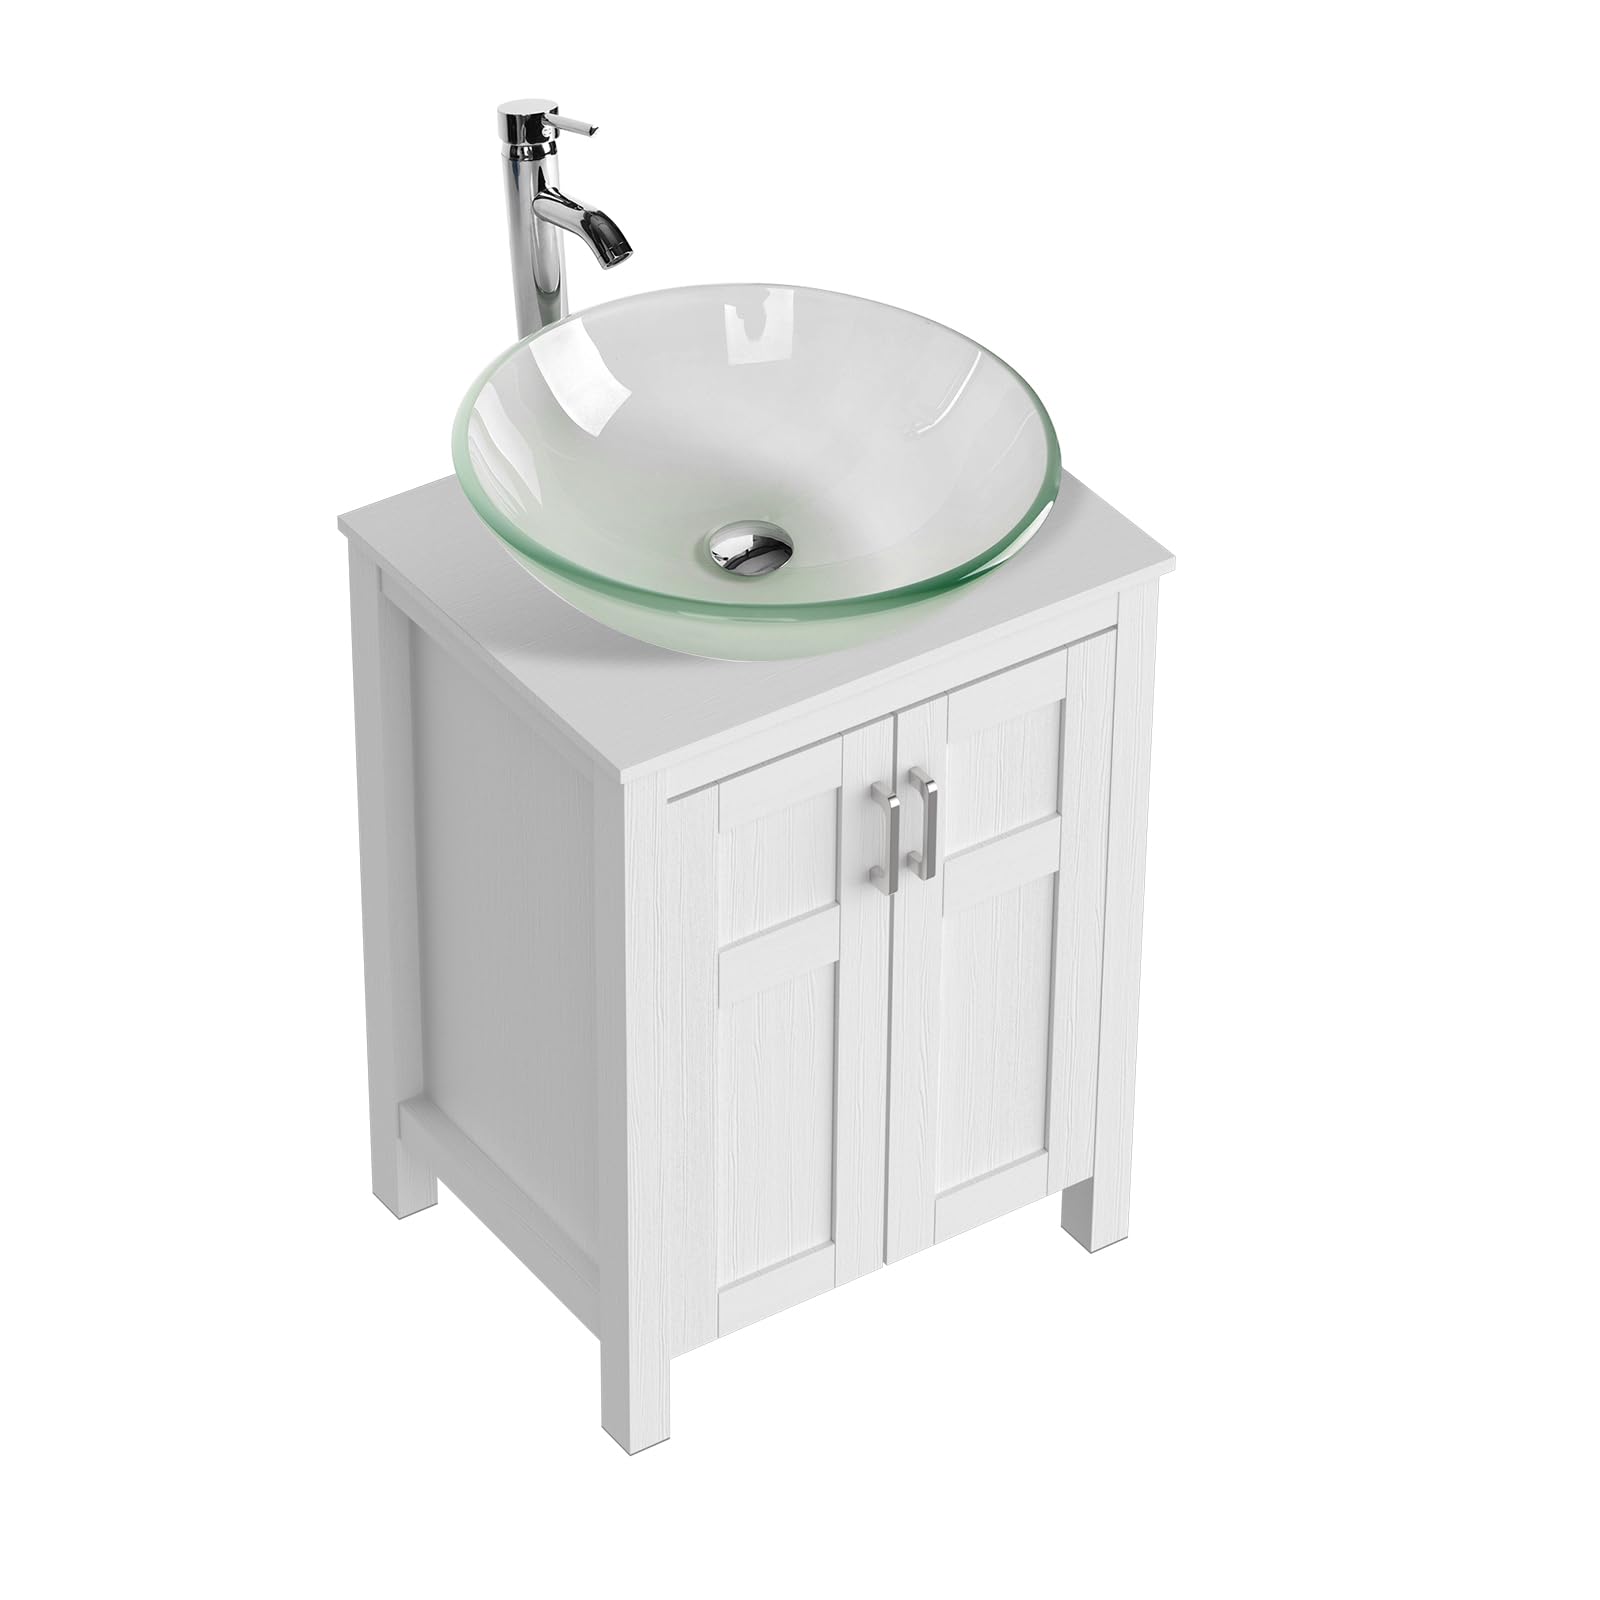 Above view of Elecwish White Bathroom Vanity and Clear Green Sink Set HW1120-WH